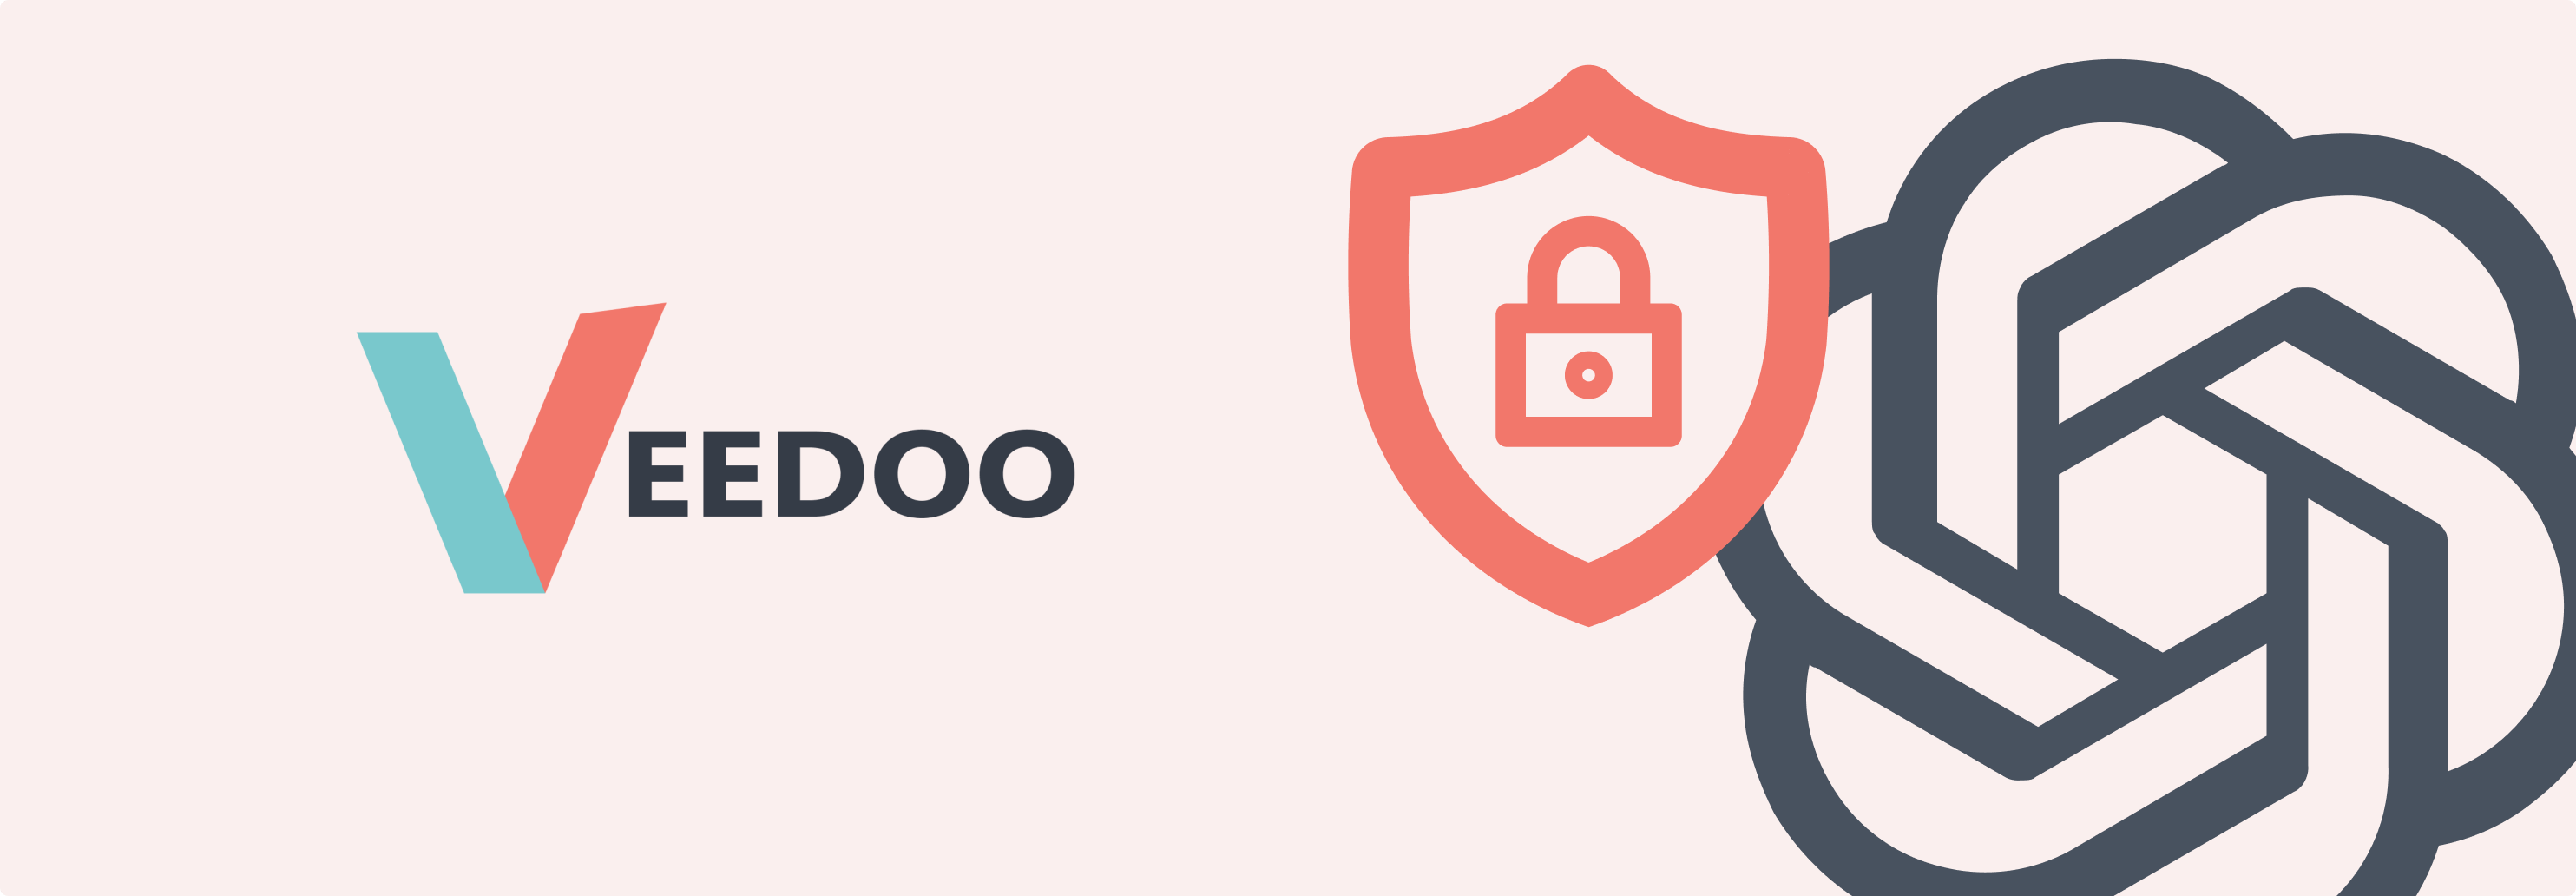 At the picture - VEEDOO logo, security image, logo openAI